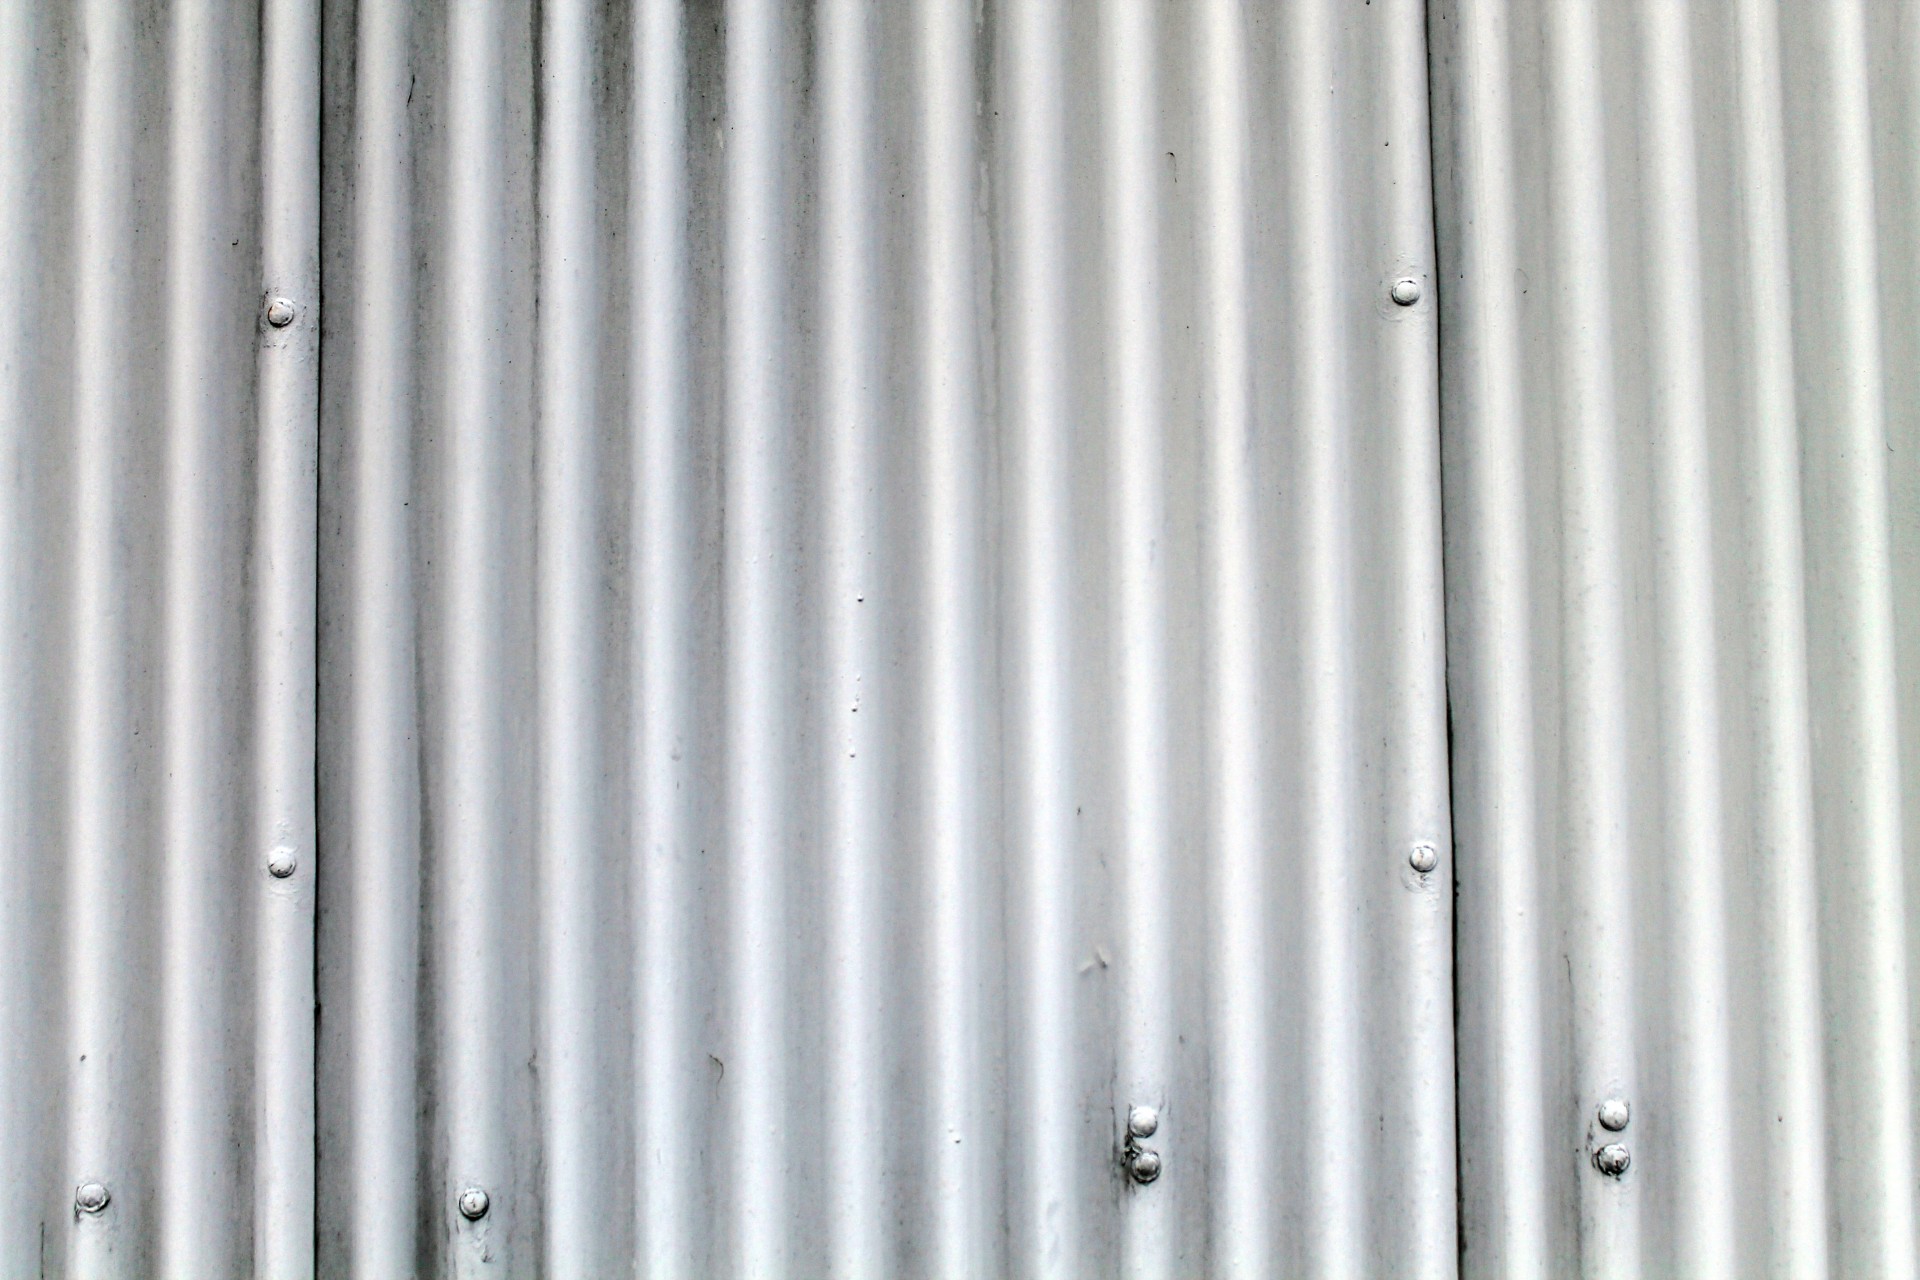 Corrugated Metal Background - I really appreciate your premium download!